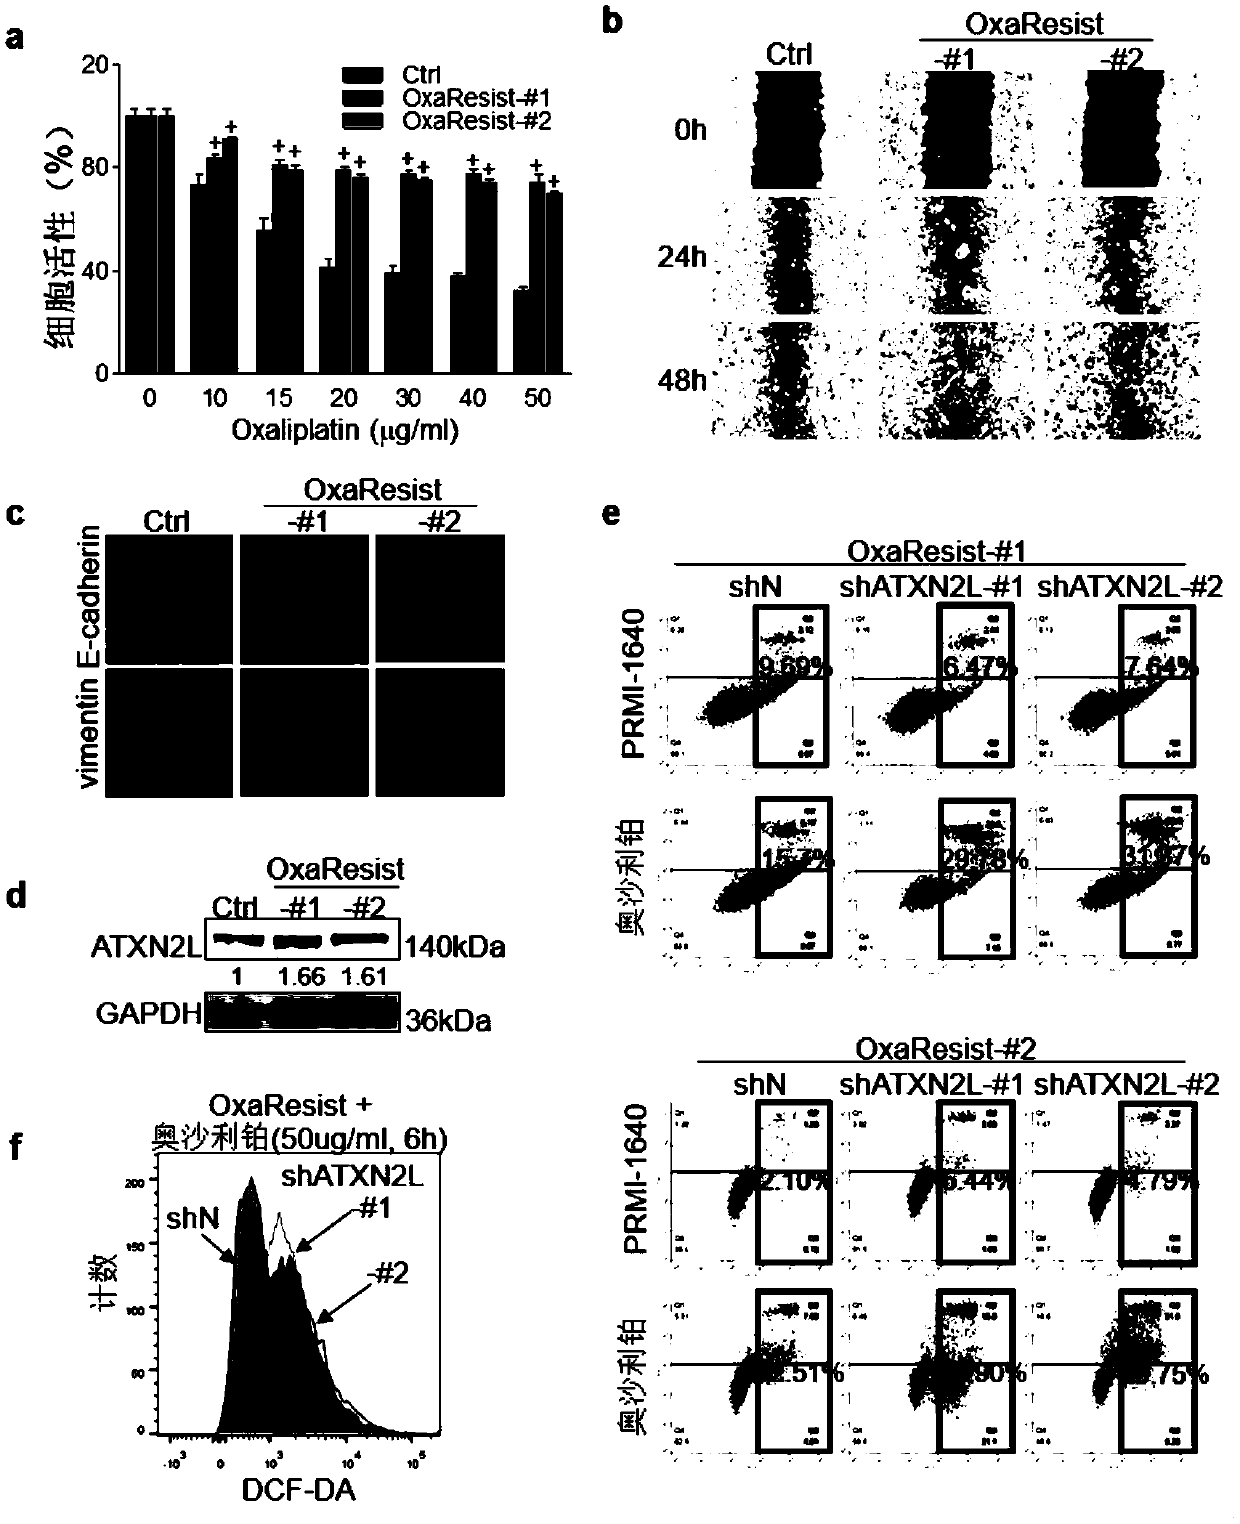 Application of ATXN2L (Ataxin-2like) as marker capable of assisting in evaluating gastric carcinoma oxaliplatin secondary drug resistance